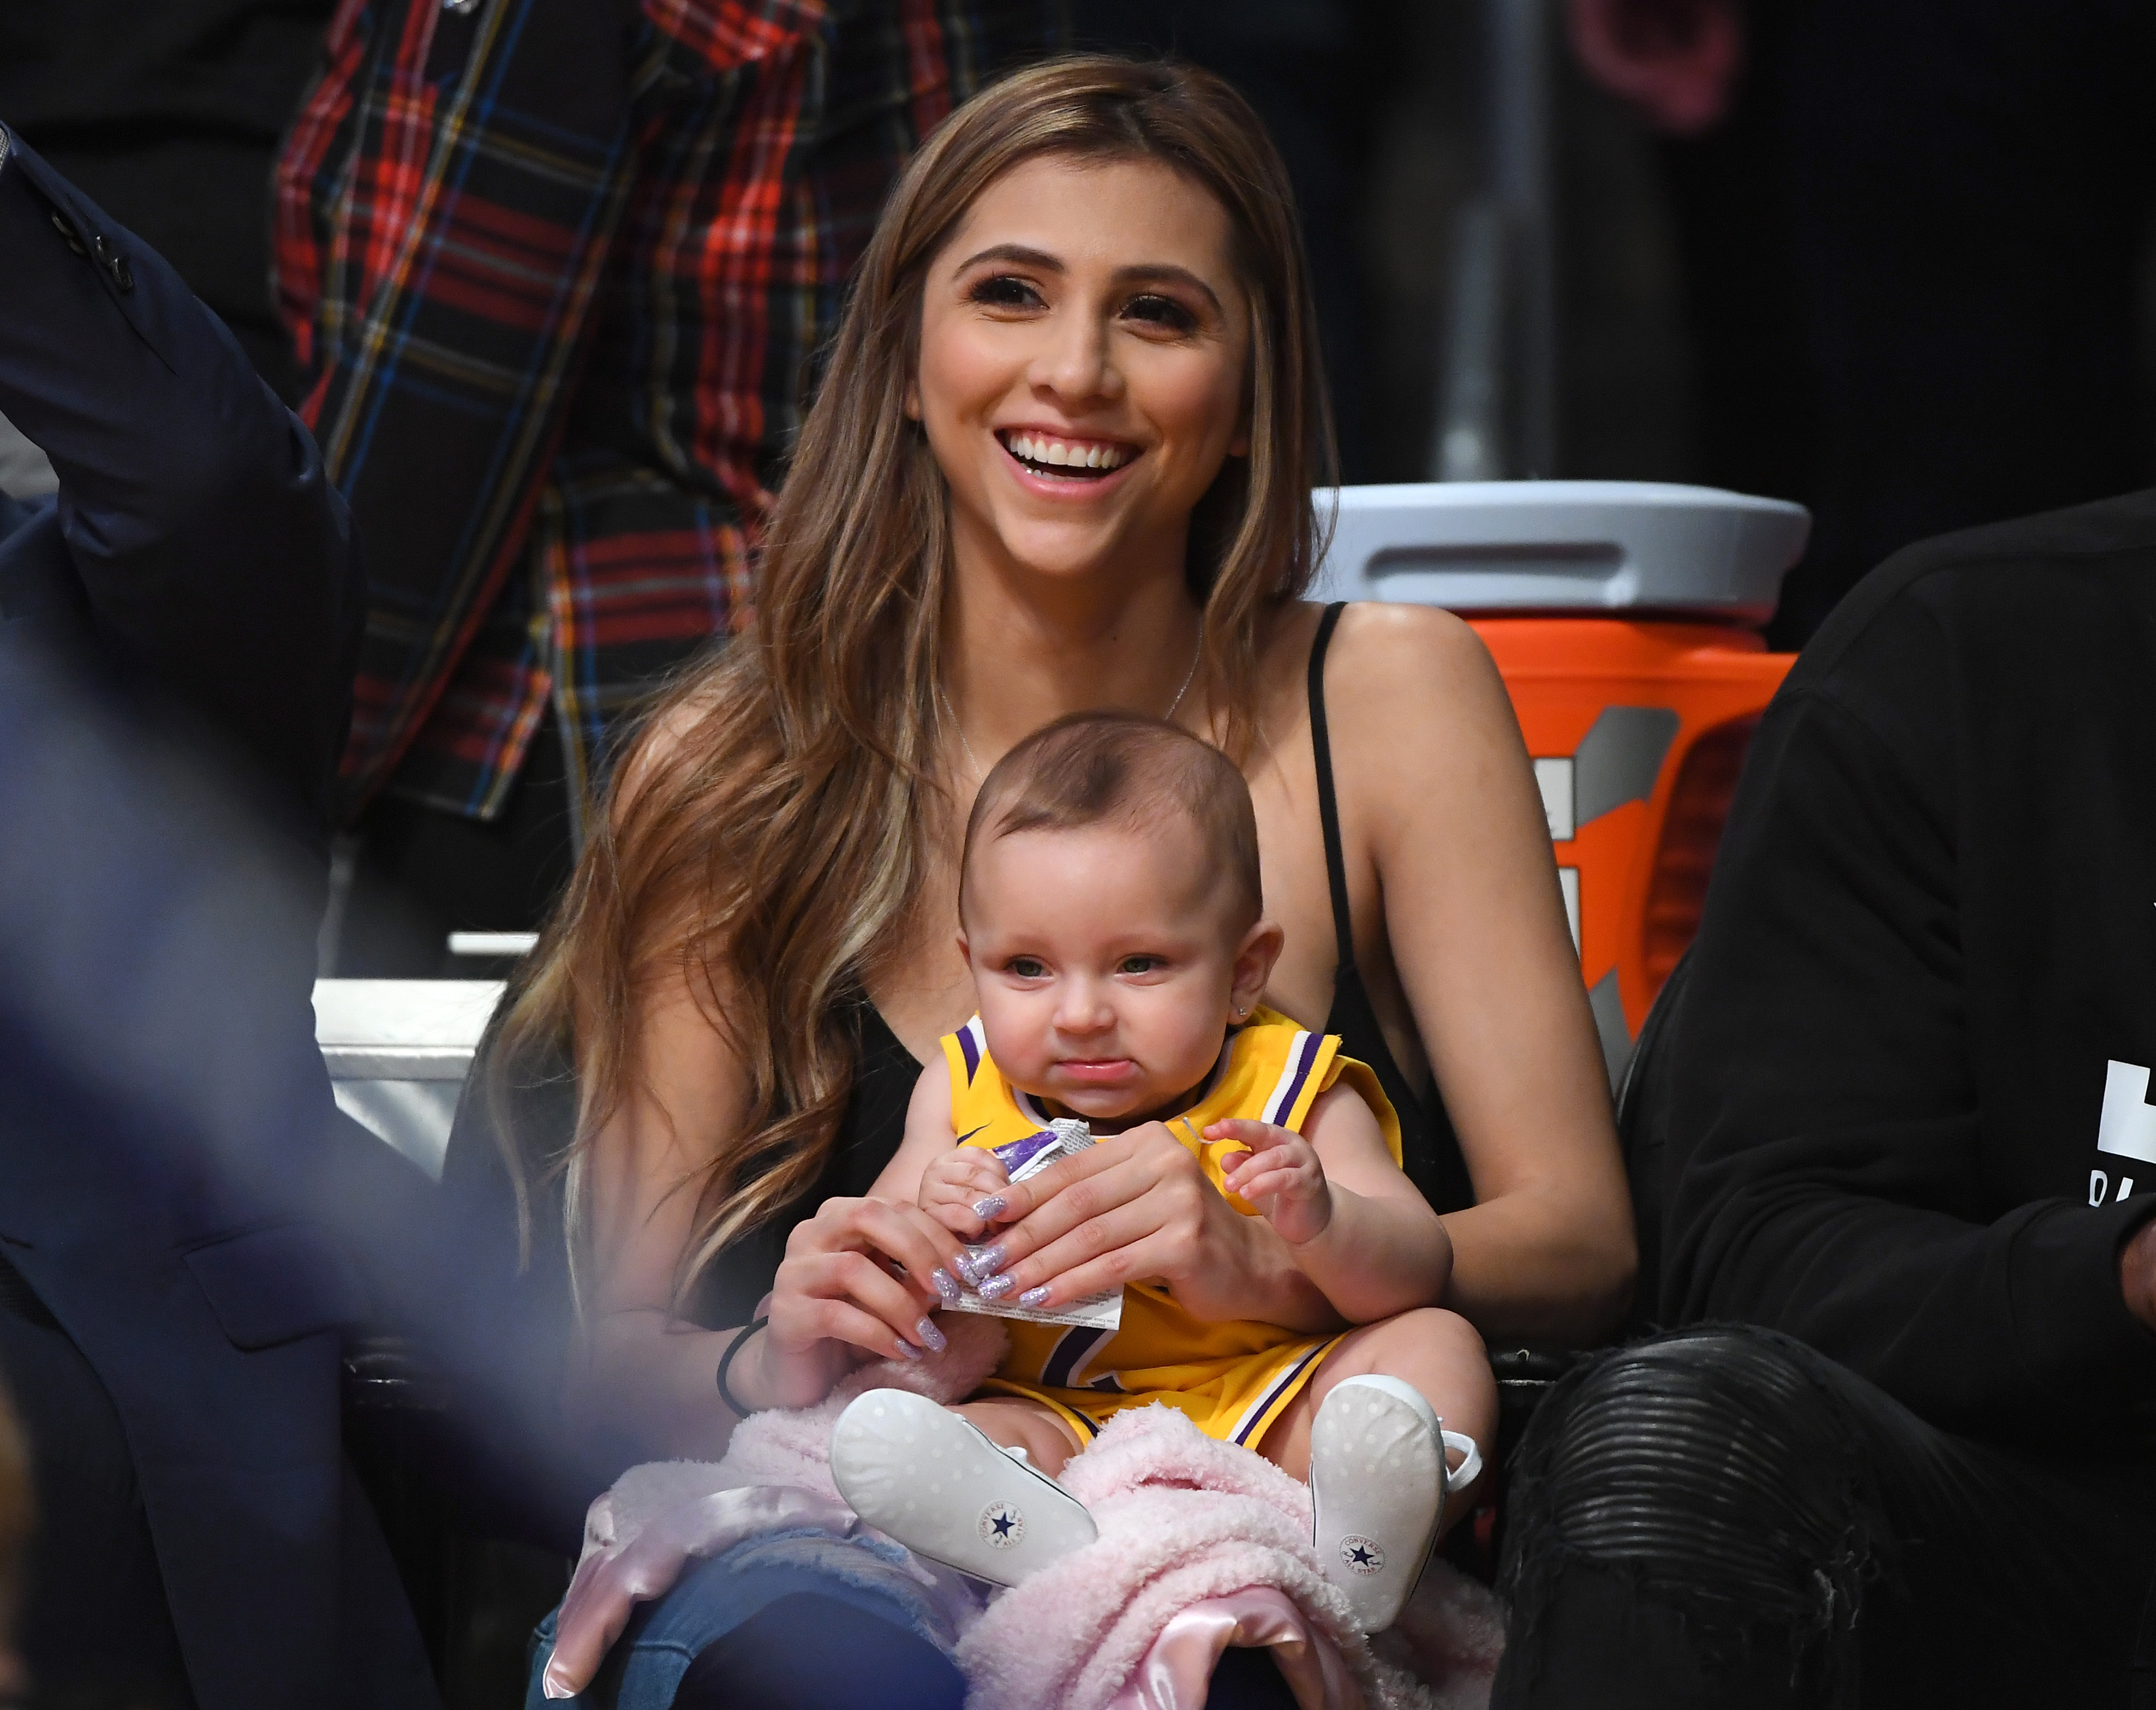 Denise Garcia and Zoey Ball during a game between the Los Angeles Lakers and the Detroit Pistons on January 9, 2019, in Los Angeles, California. | Source: Getty Images